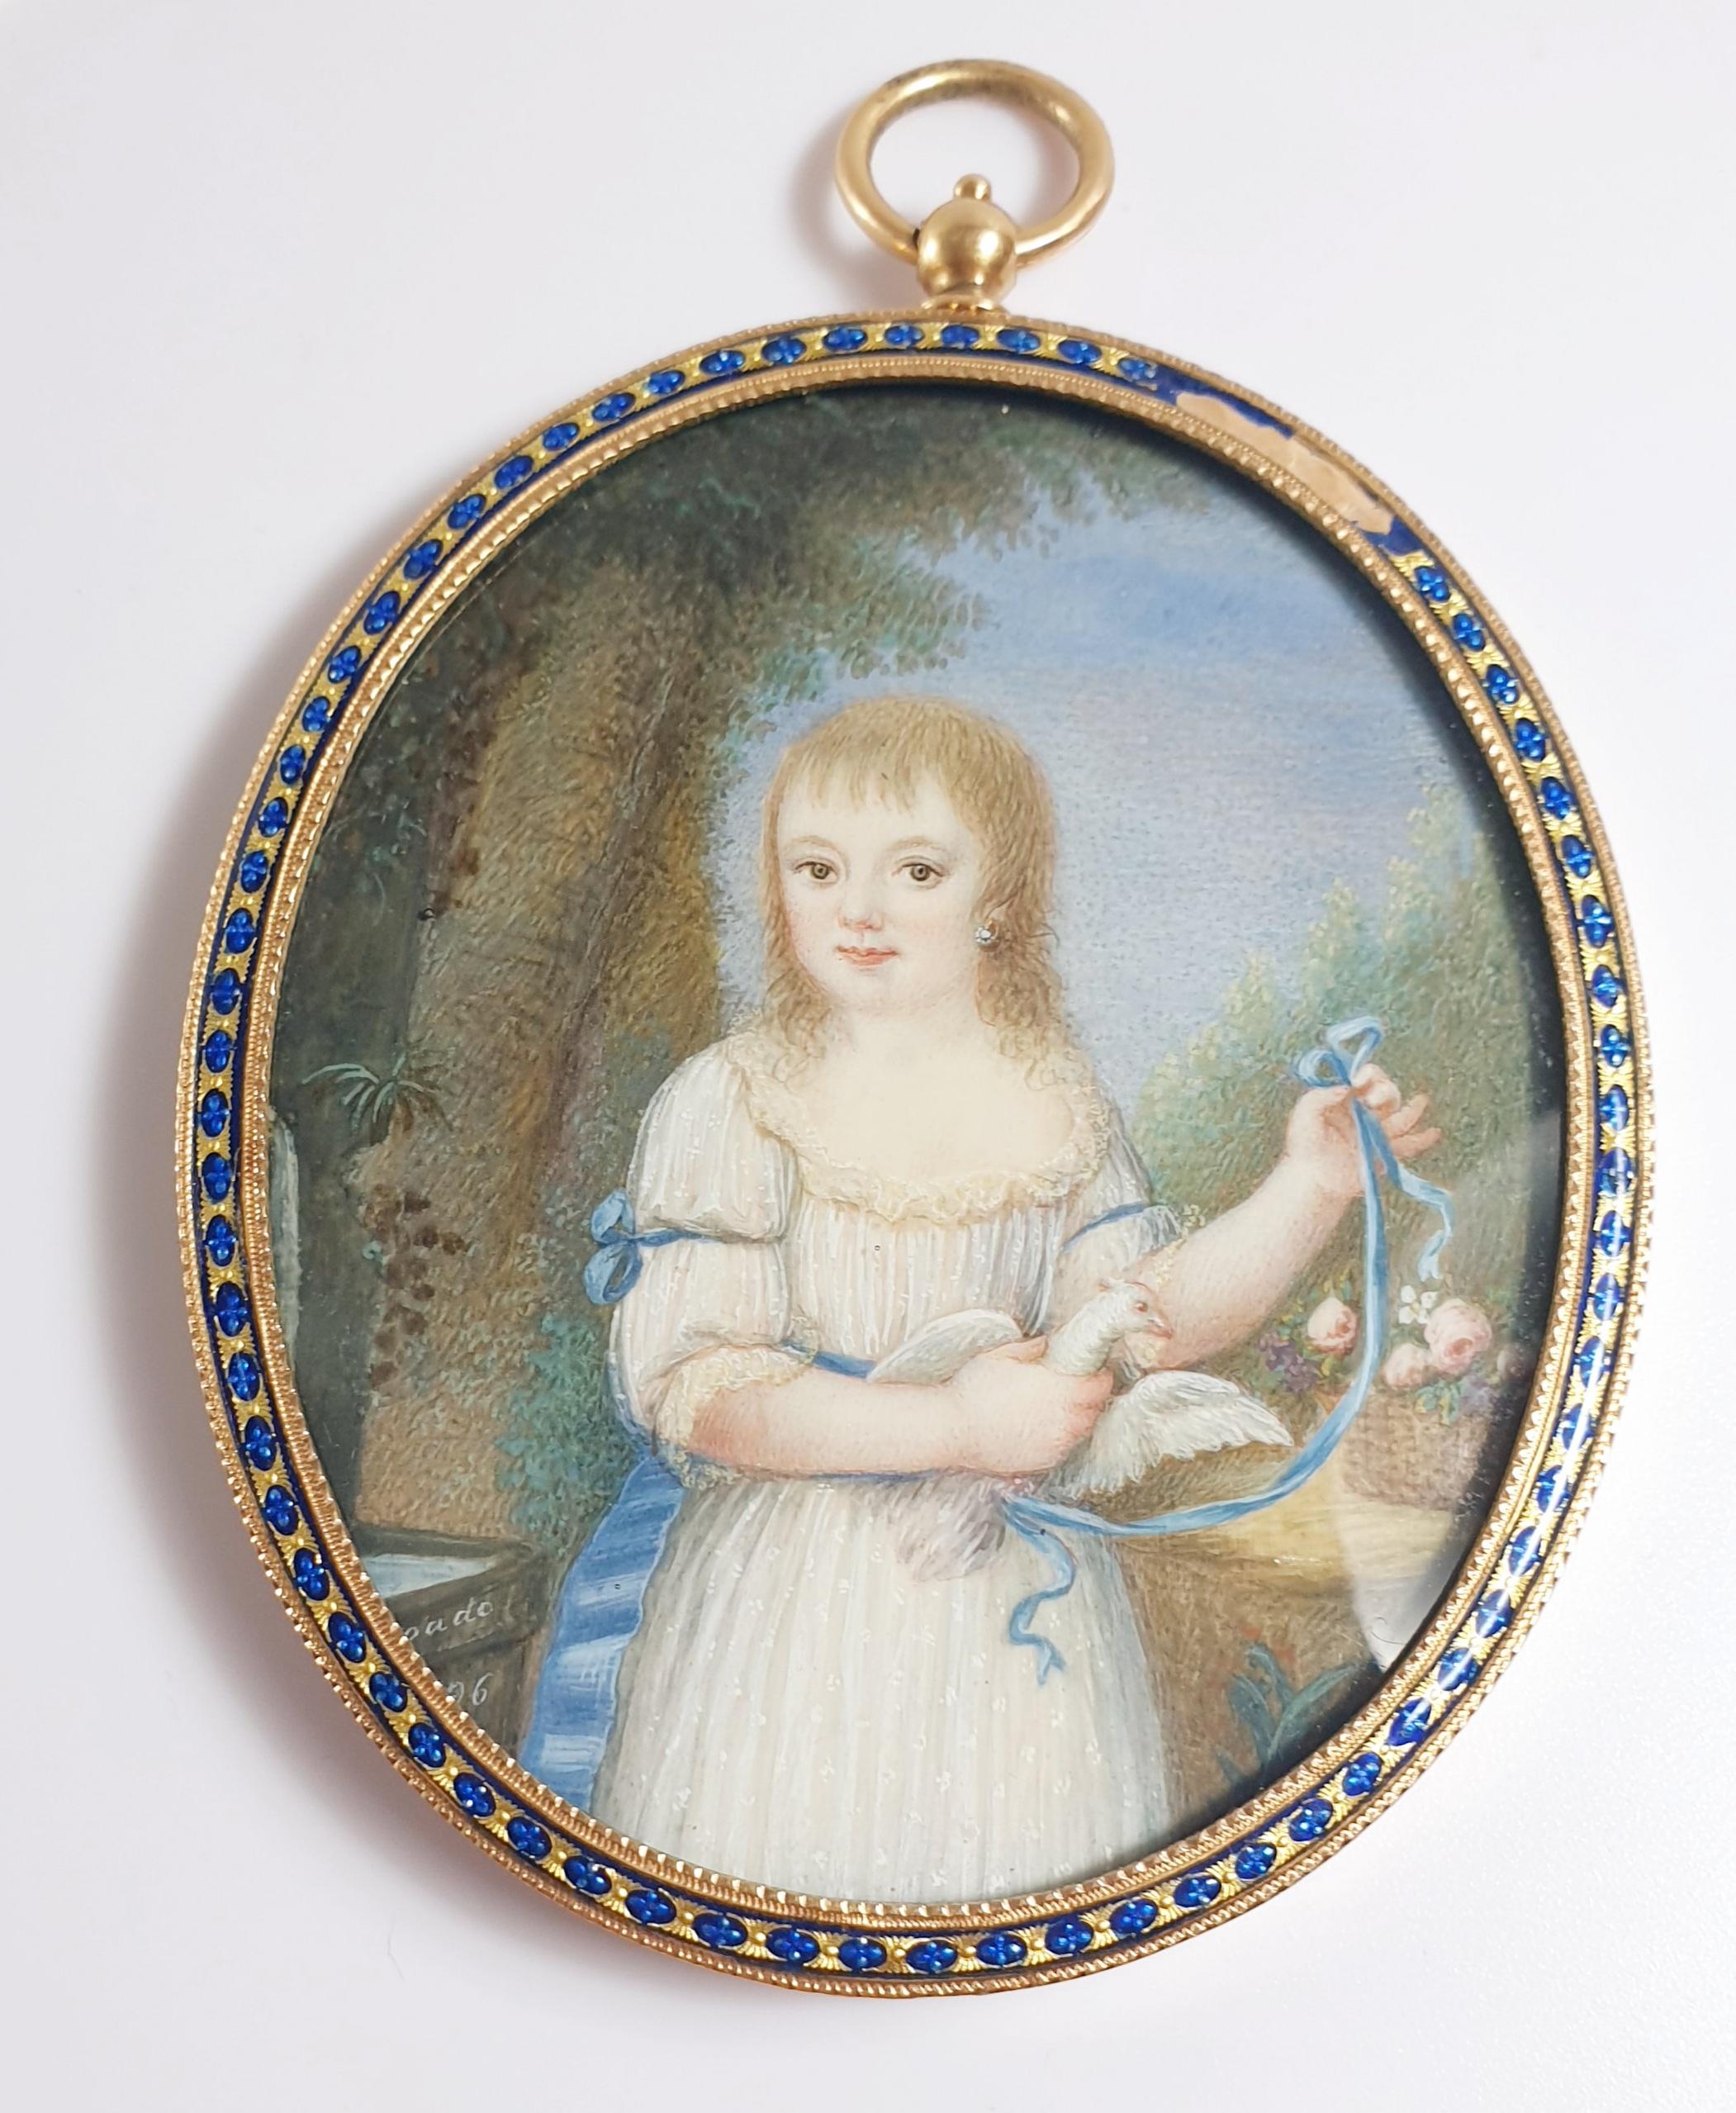 XIX Century Oval Photo Frame Pendant in Yellow Gold with Blue Enamel Ornaments.
Inside a miniature of a little girl with a dove, a basket of flowers and a ribbon.
Measures:
90x64mm / 3.54x2.51in.

READY TO SHIP
*Shipment of this piece is not